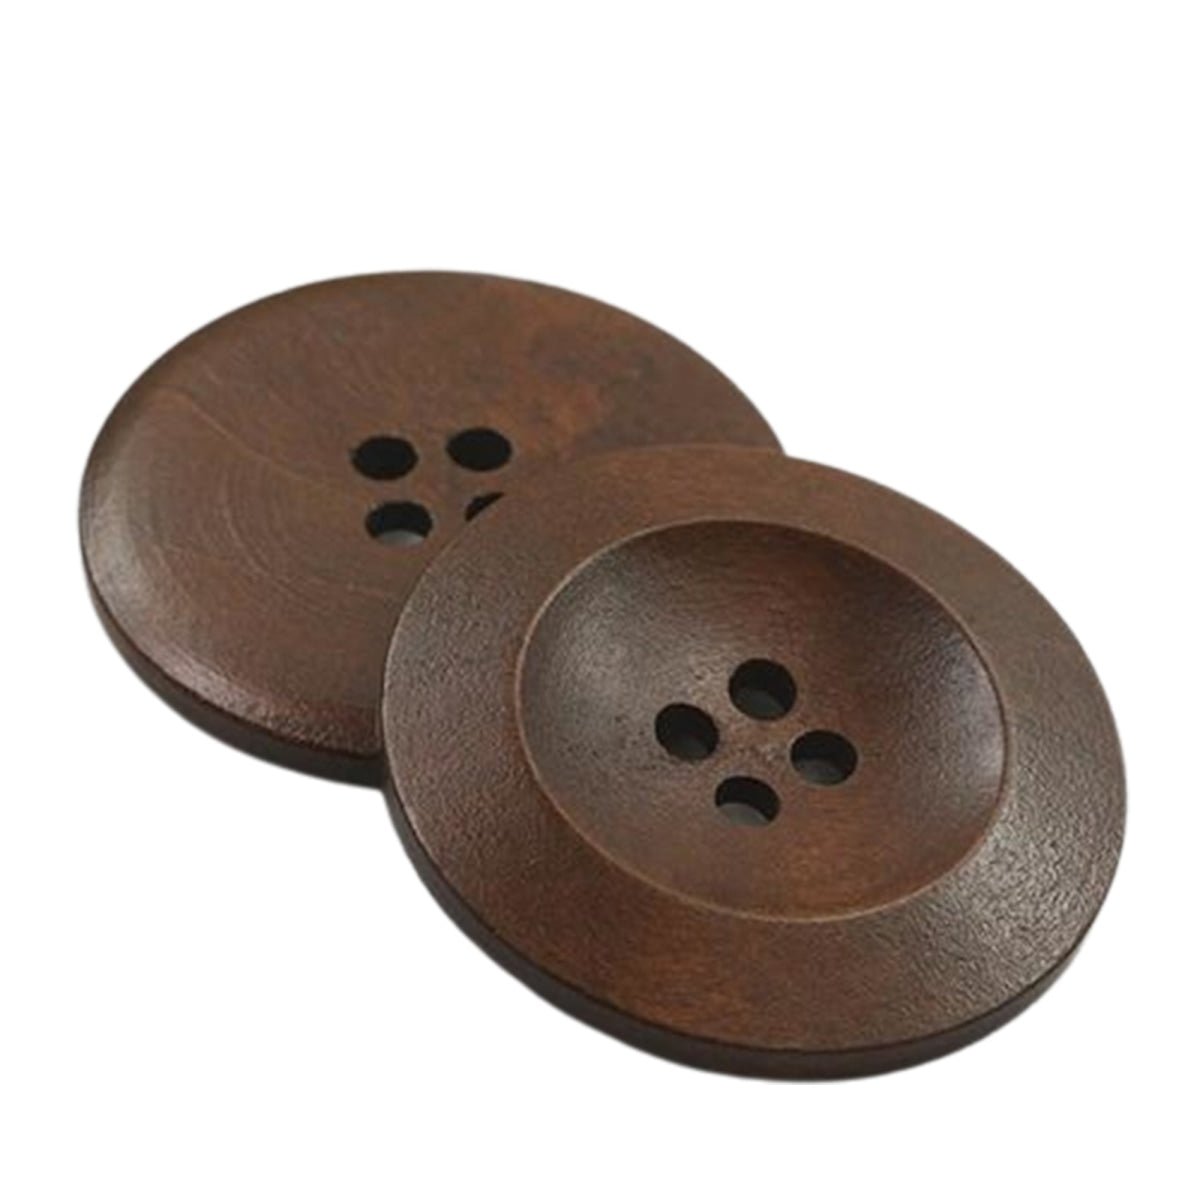 50pcs 15mm 20mm 25mm 30mm 35mm 4 Hole Wooden Buttons Sewing Round Wood Button For Clothes Coat Handmade - 23mm Dark Coffee - - Asia Sell